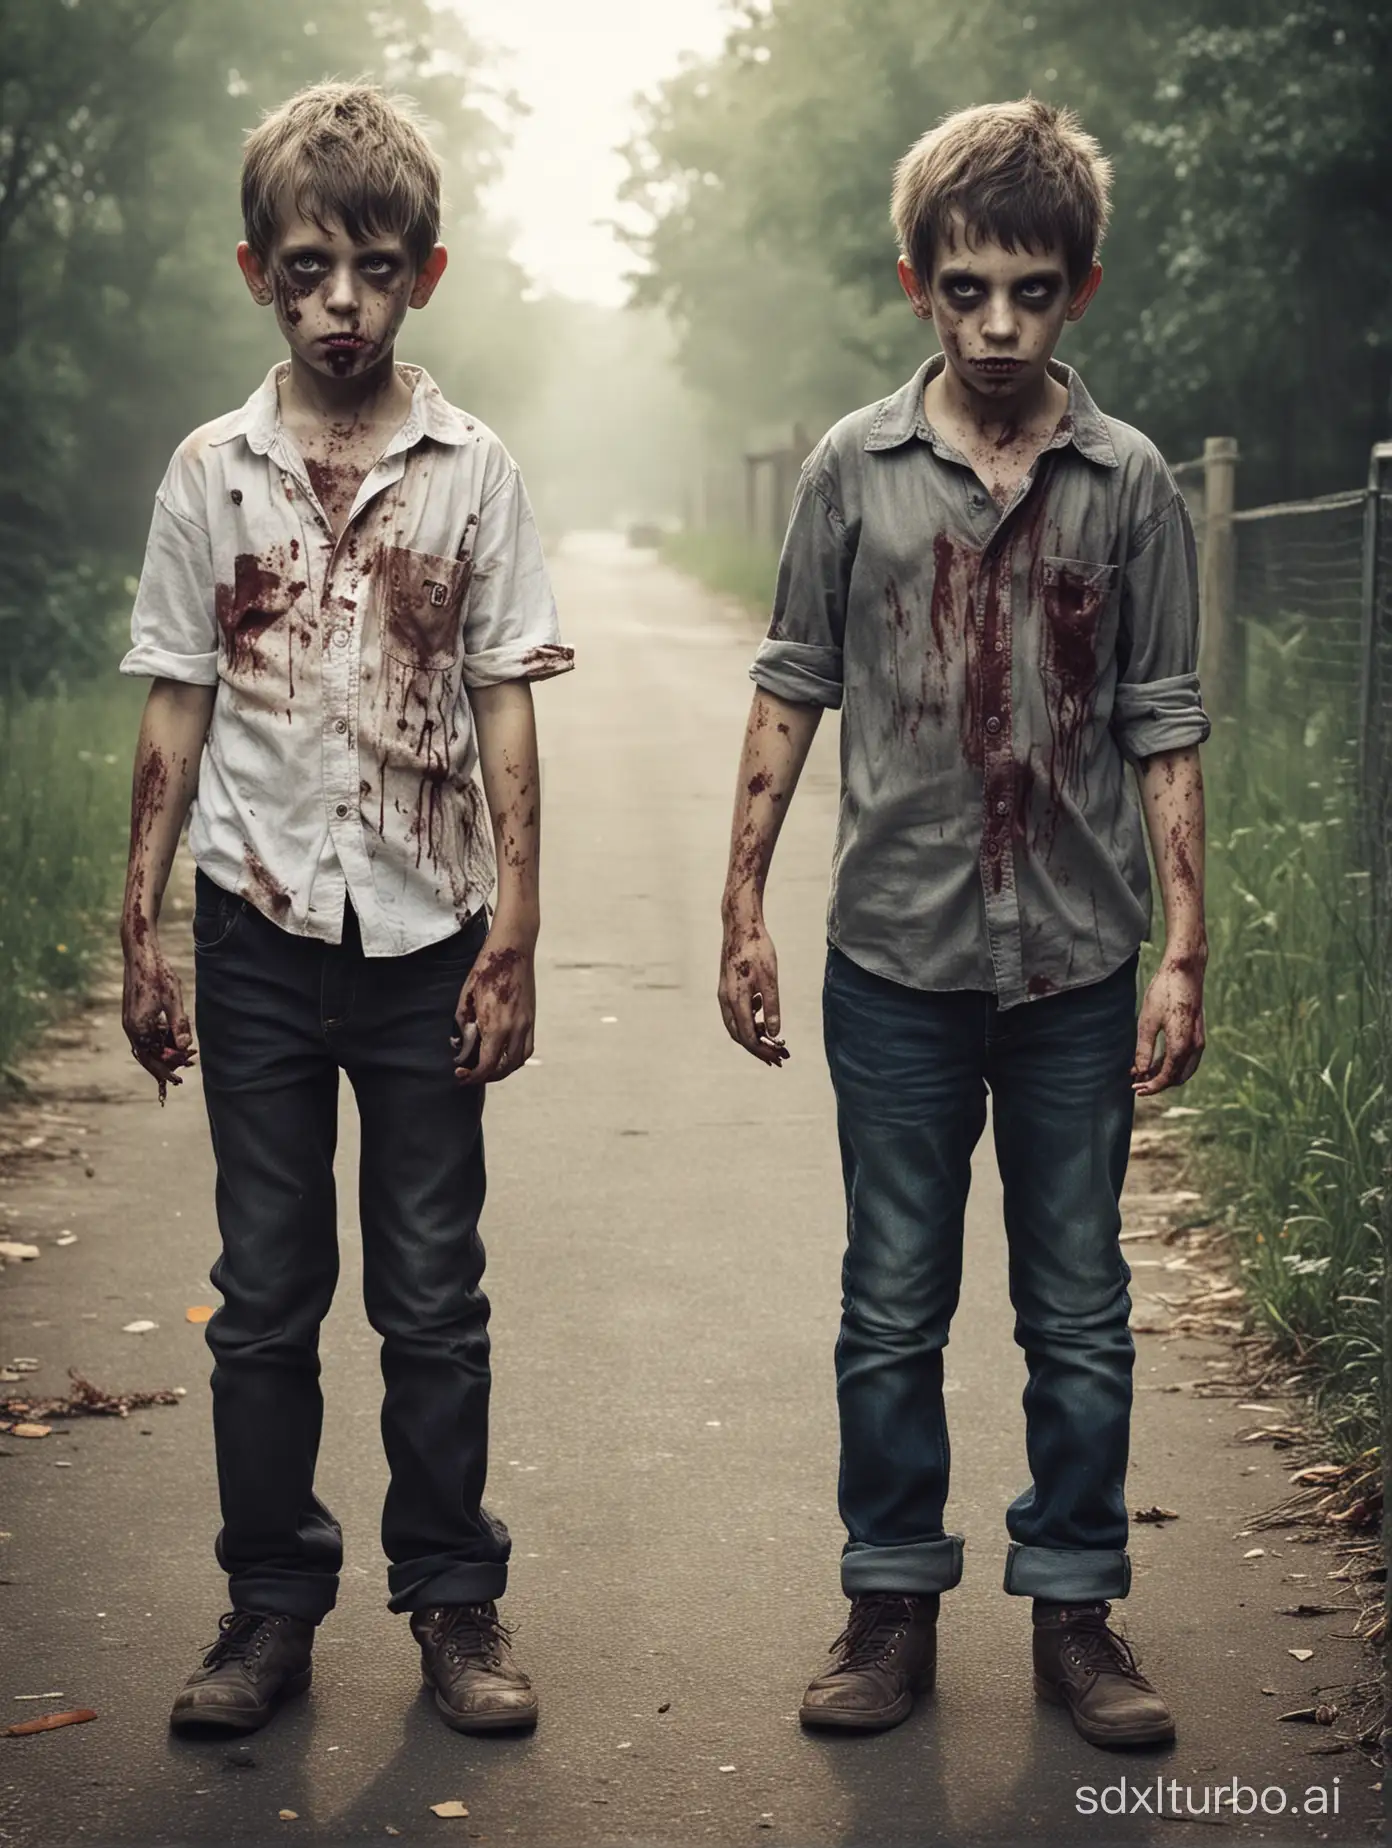 Little-Boys-Playfully-Transform-into-Zombies